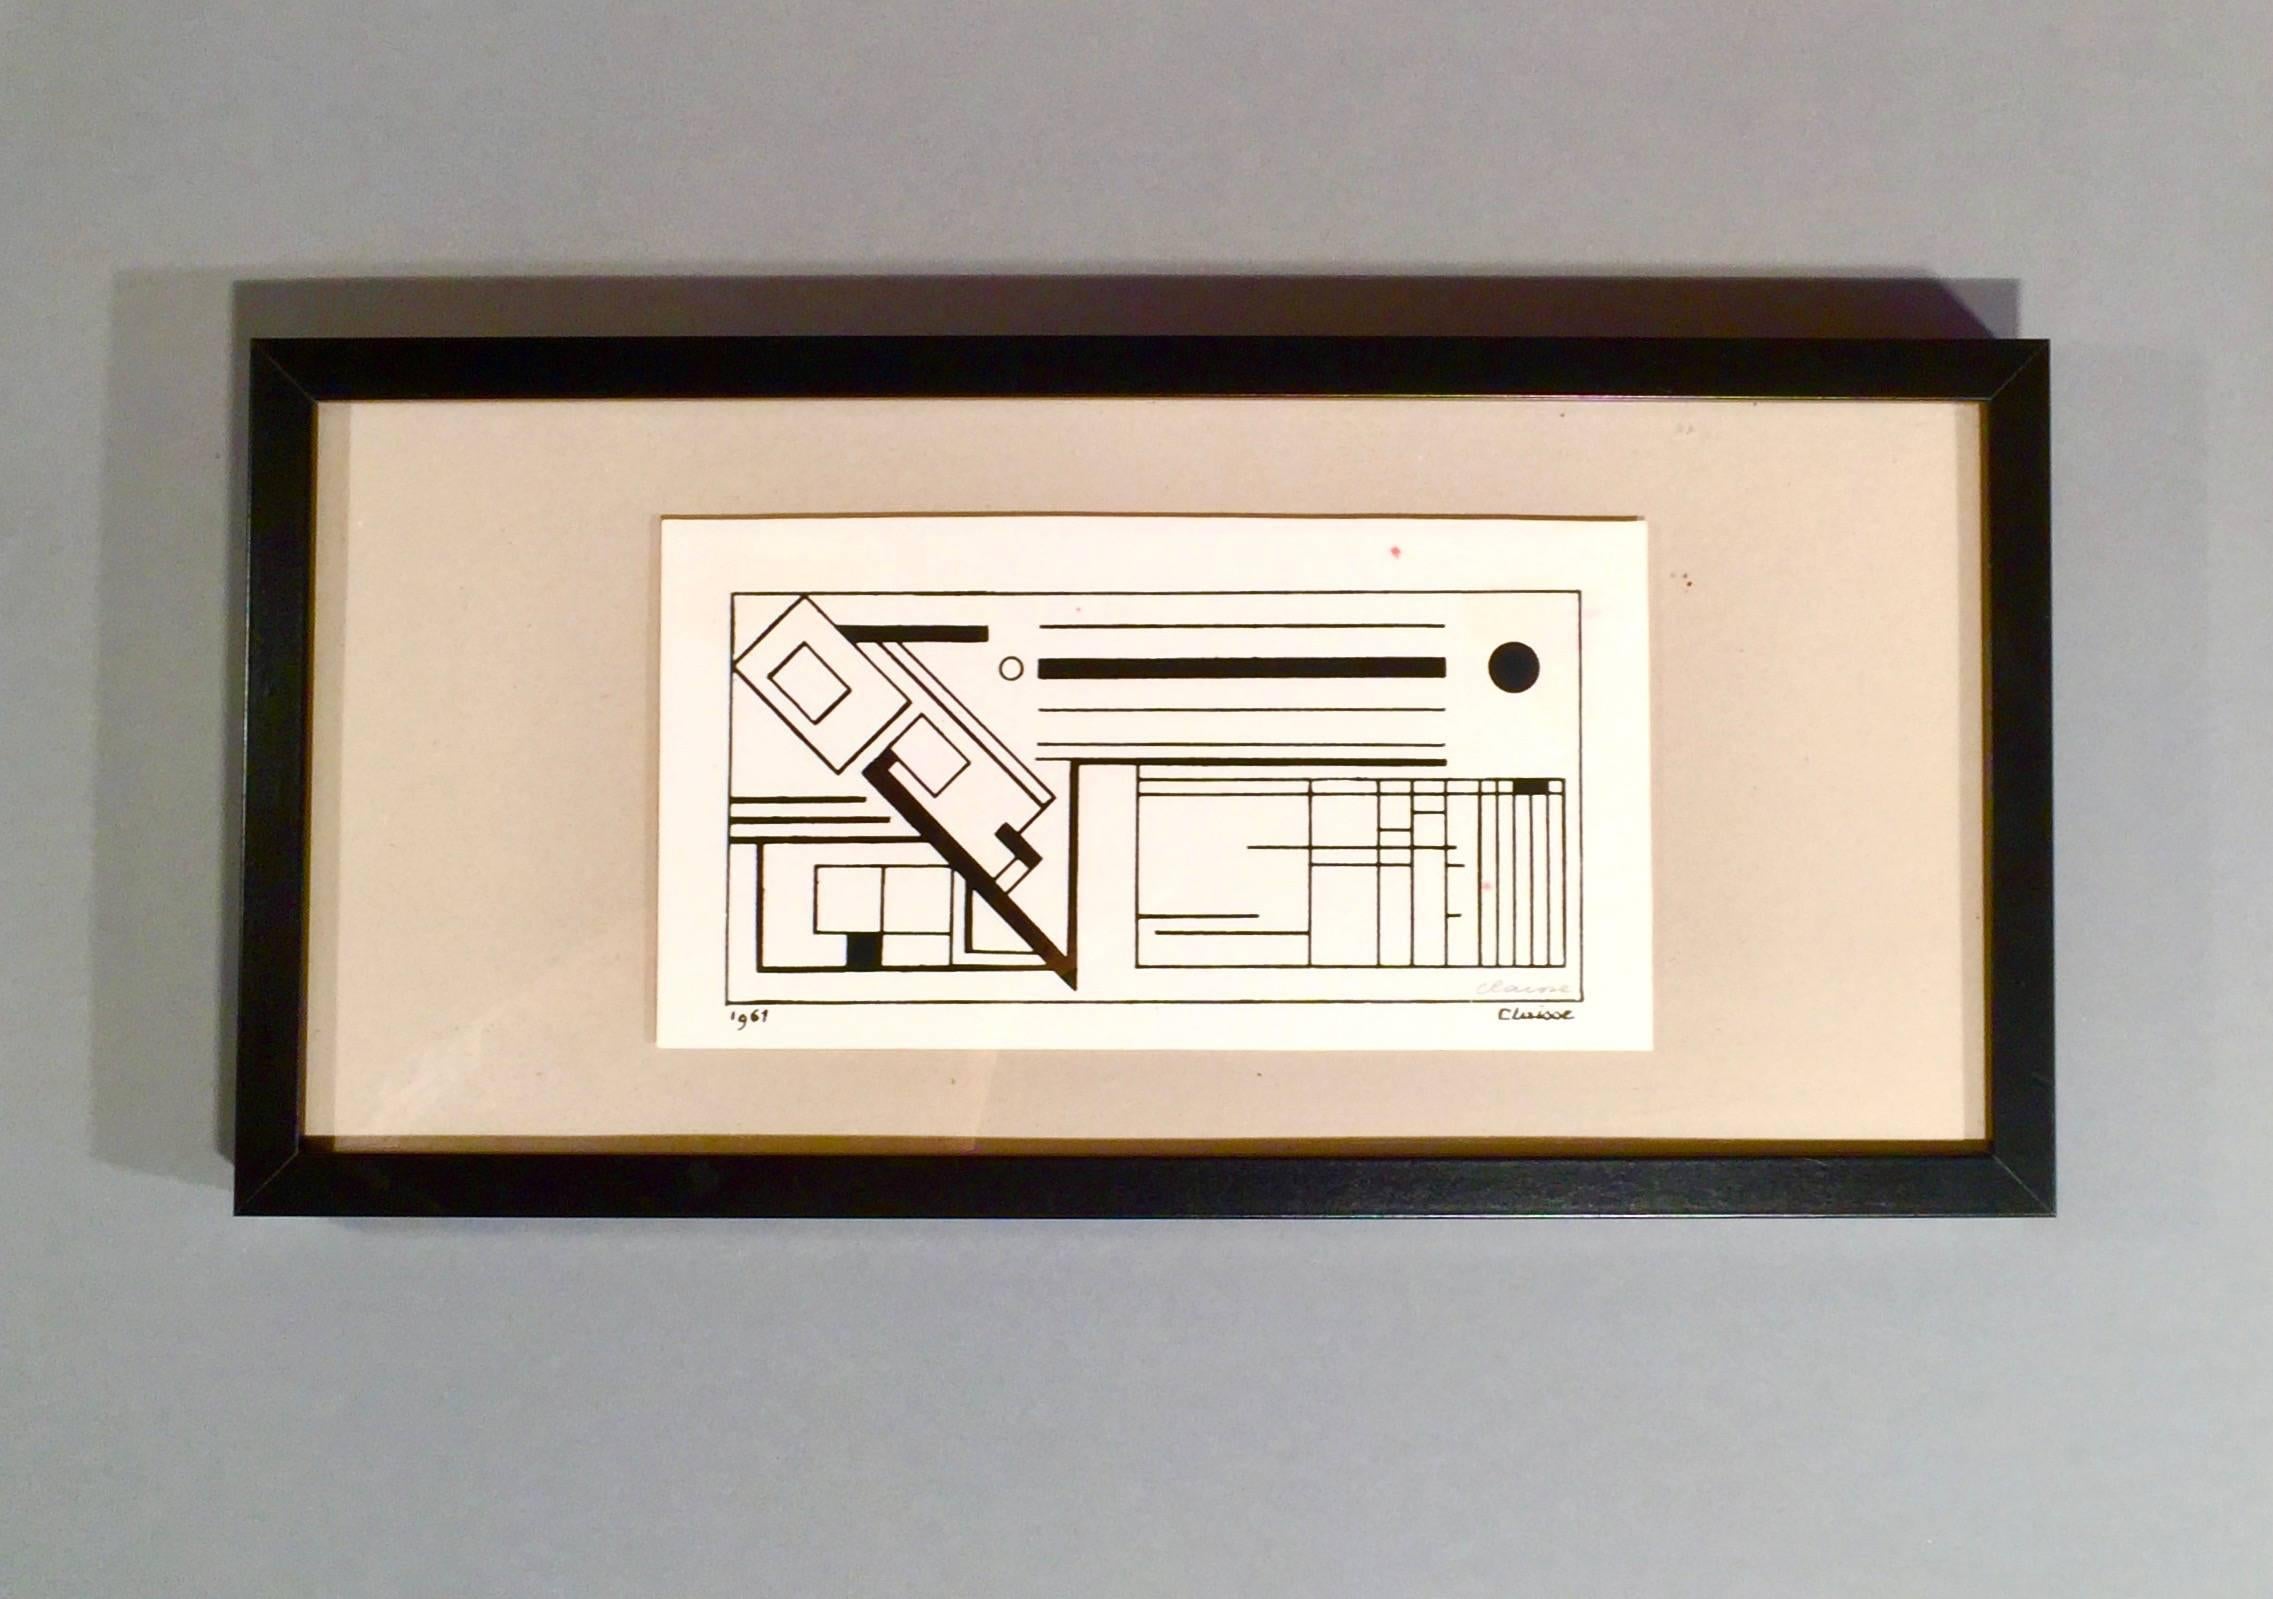 Unknown media (ink on paper-print or drawing), signed with pencil, measure: 15.5 x 29.6 cm, framed in a 50 x 23 cm frame. Two red ink dots (possibly from the artist), otherwise great condition.

Geneviève Claisse, born in 1935 in Quiévy, is a